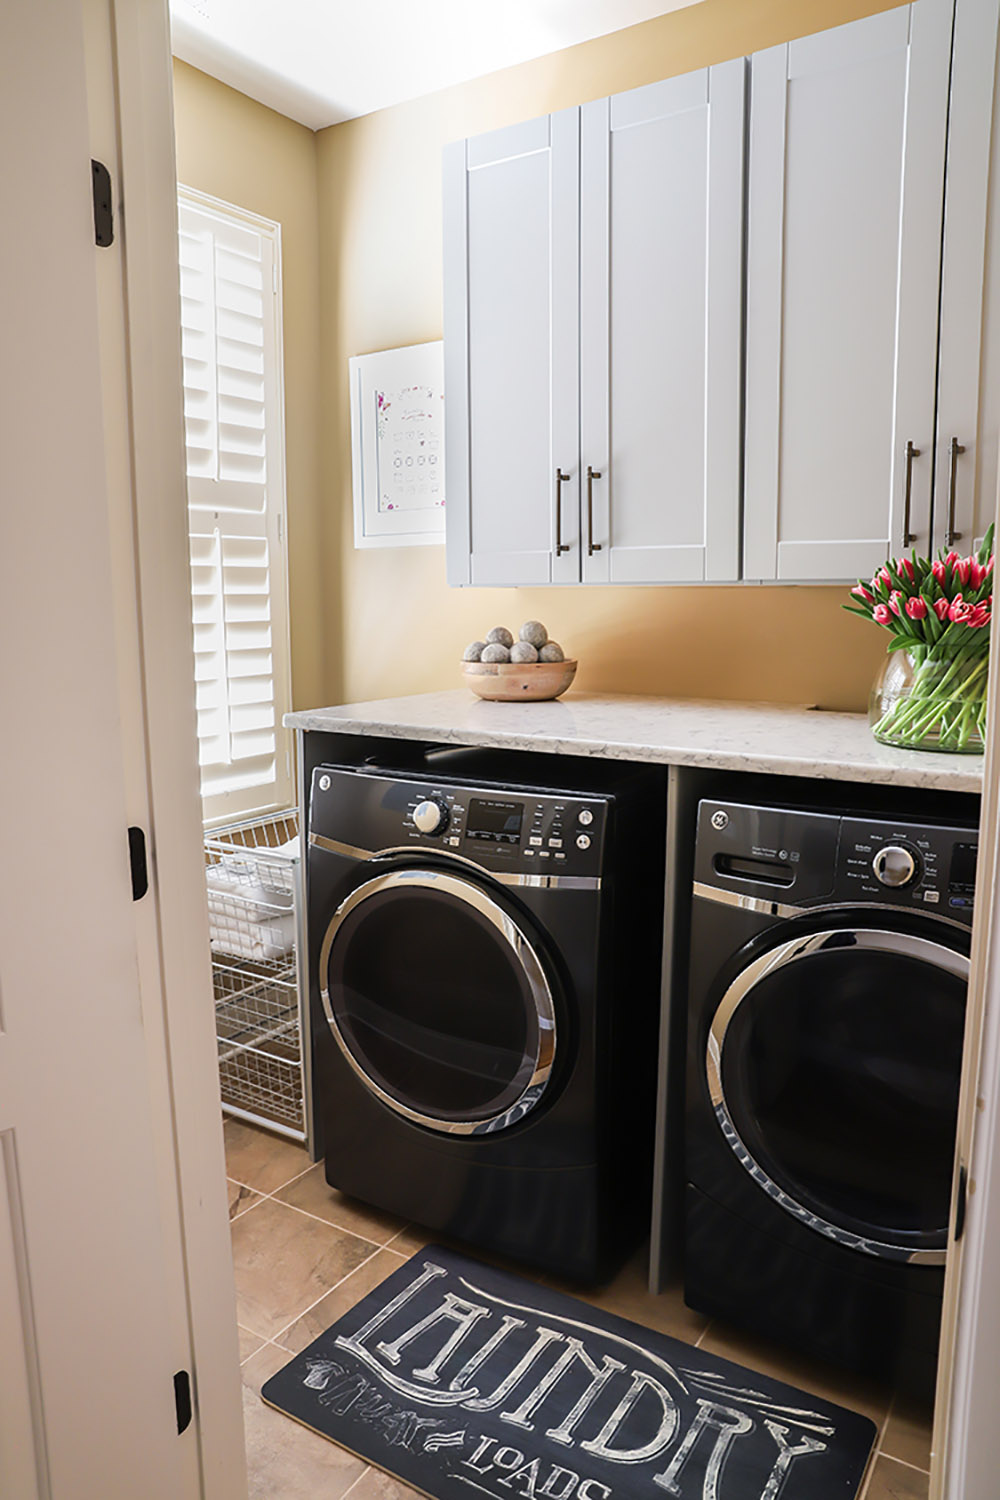 Laundry Room Cabinets - Laundry Room Storage - The Home Depot